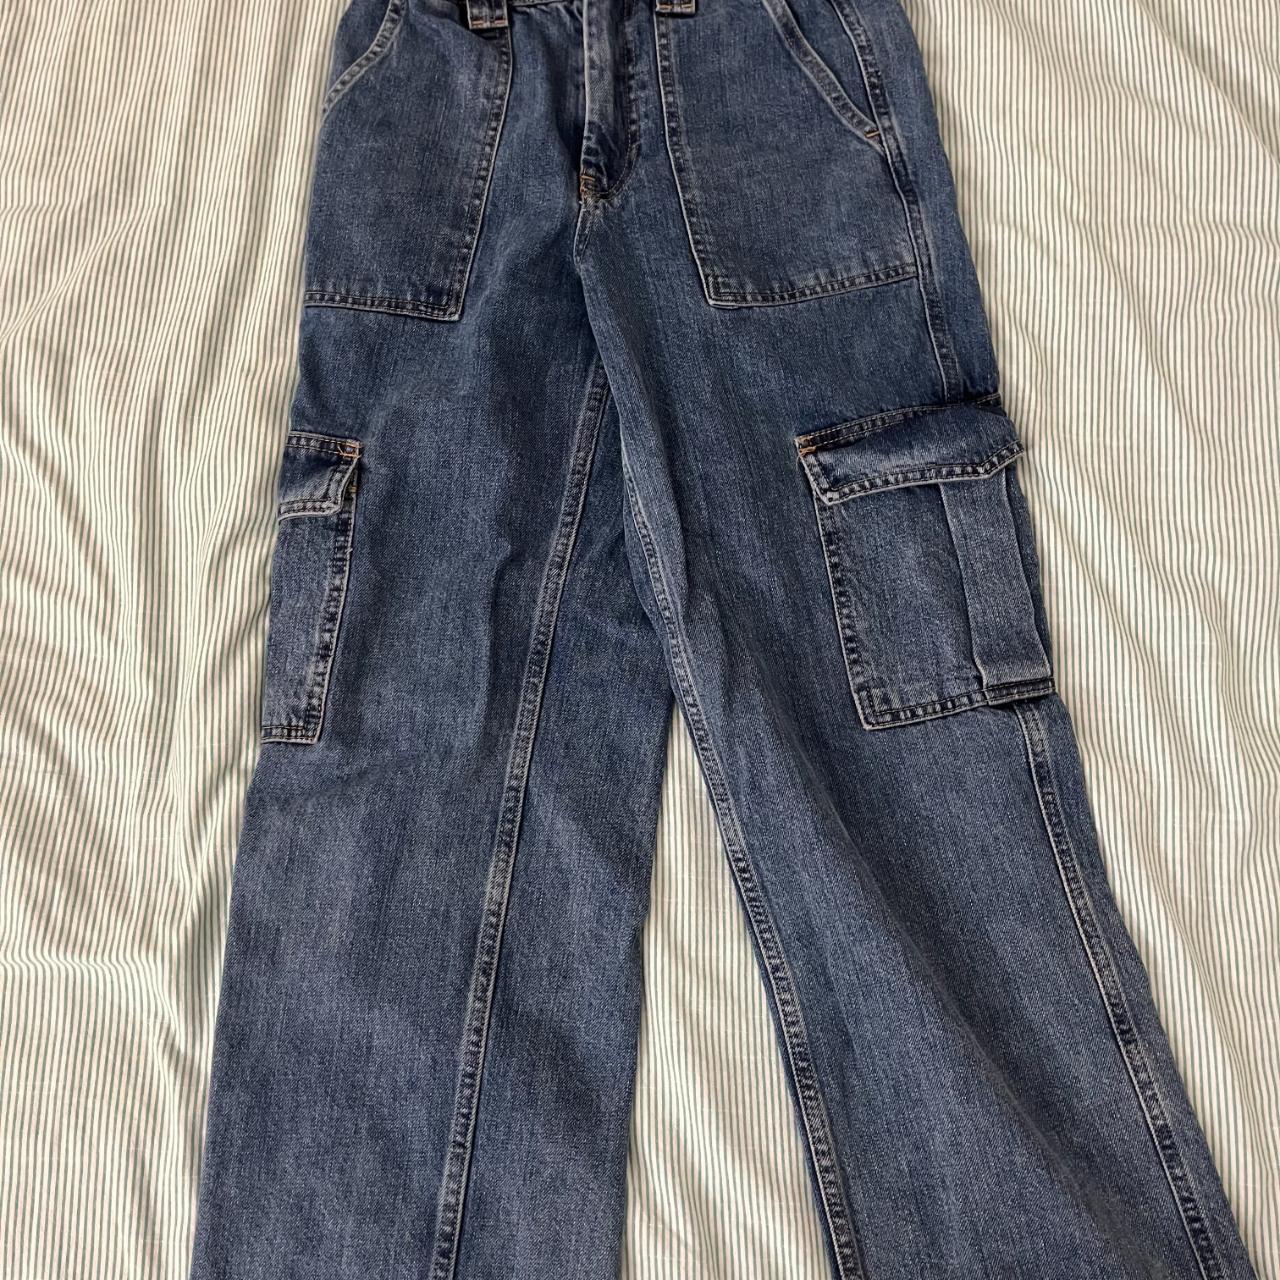 Urban Outfitters BDG skater cargo jeans with... - Depop